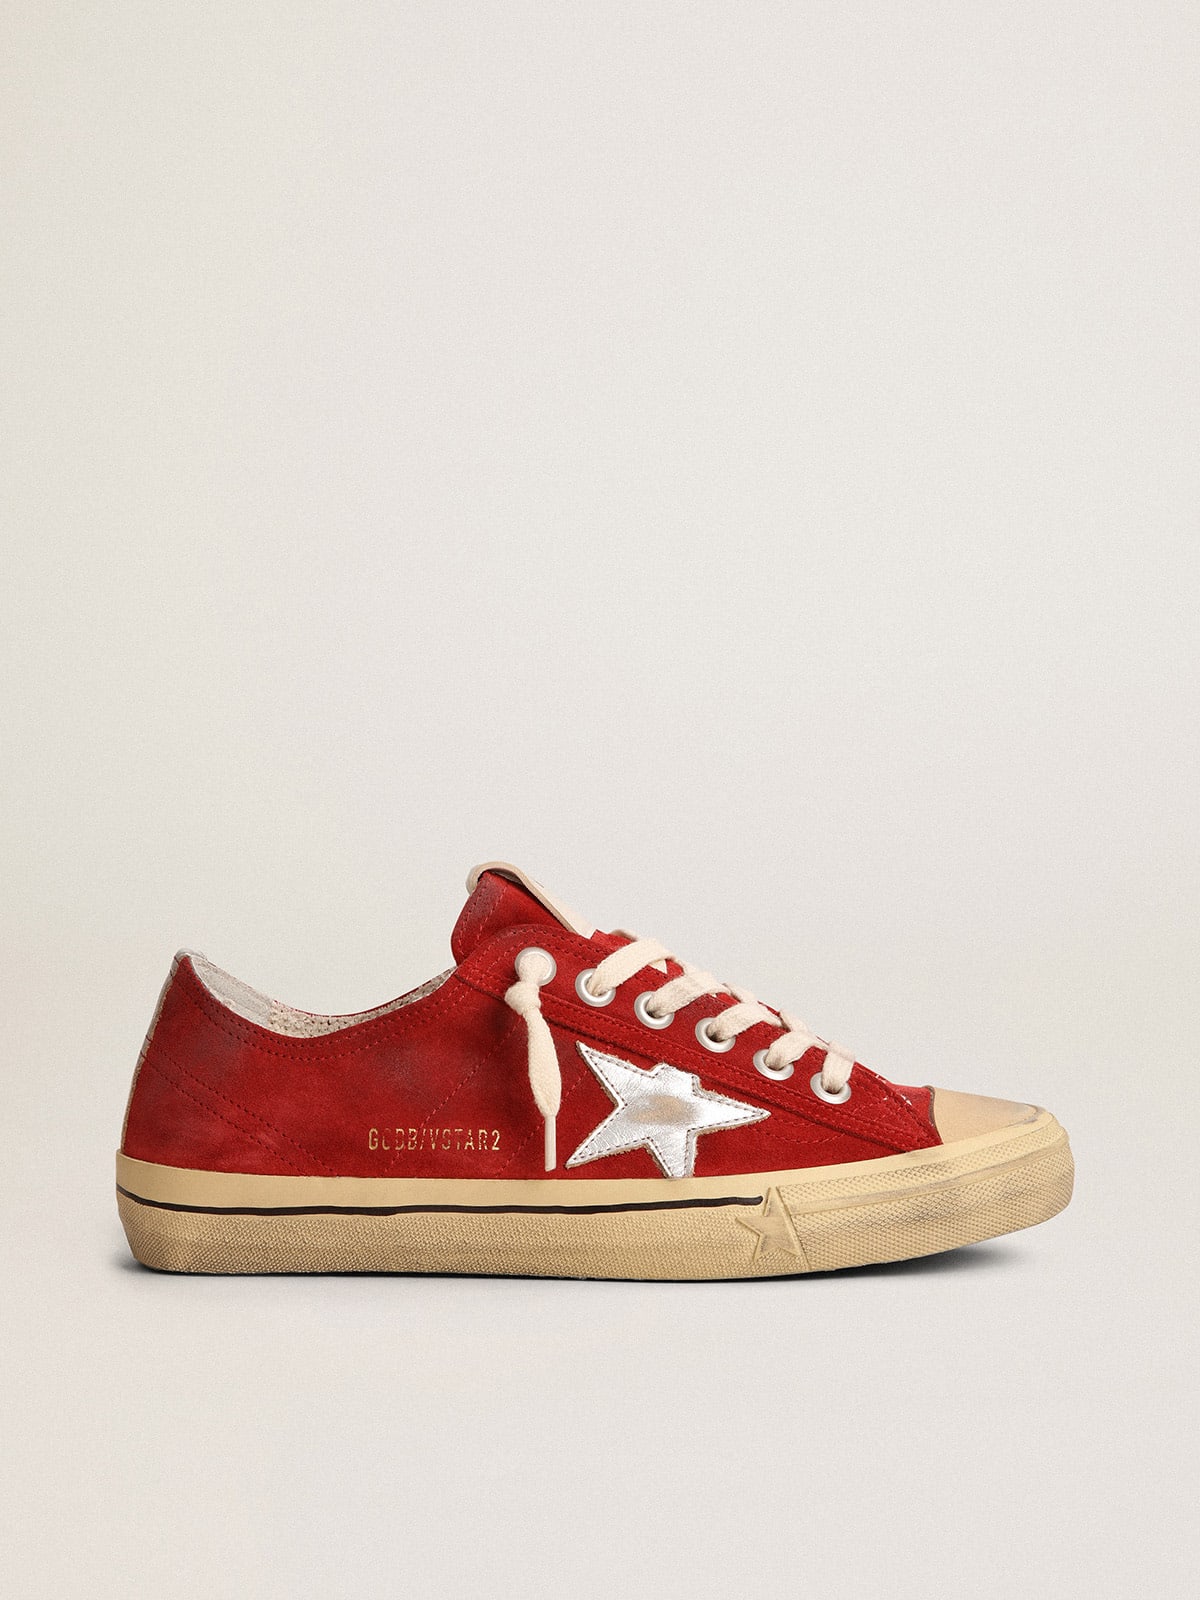 V-Star LTD sneakers in dark red suede with silver metallic leather star and heel tab